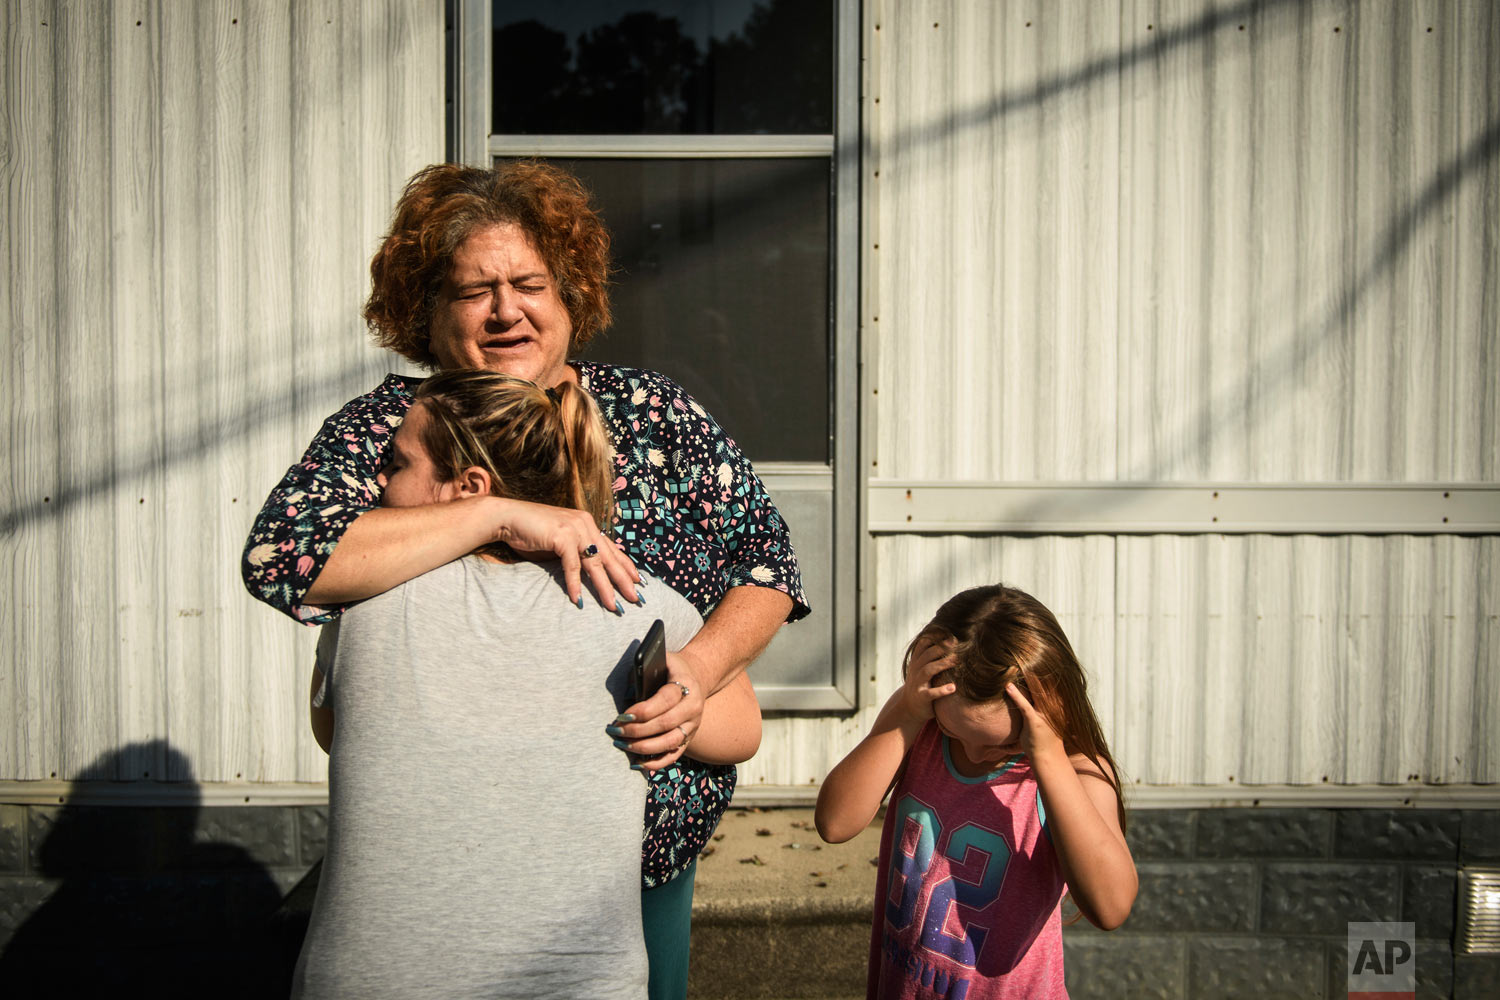  Melanie Wensel gives her neighbor Linda Remmel a hug as Wensel's daughter, Emily, stands near, Thursday, Sept. 20, 2018, at Speranza Mobile Home Park off of Manchester Road in Spring Lake, N.C. Most of the residents of the park had their homes flood